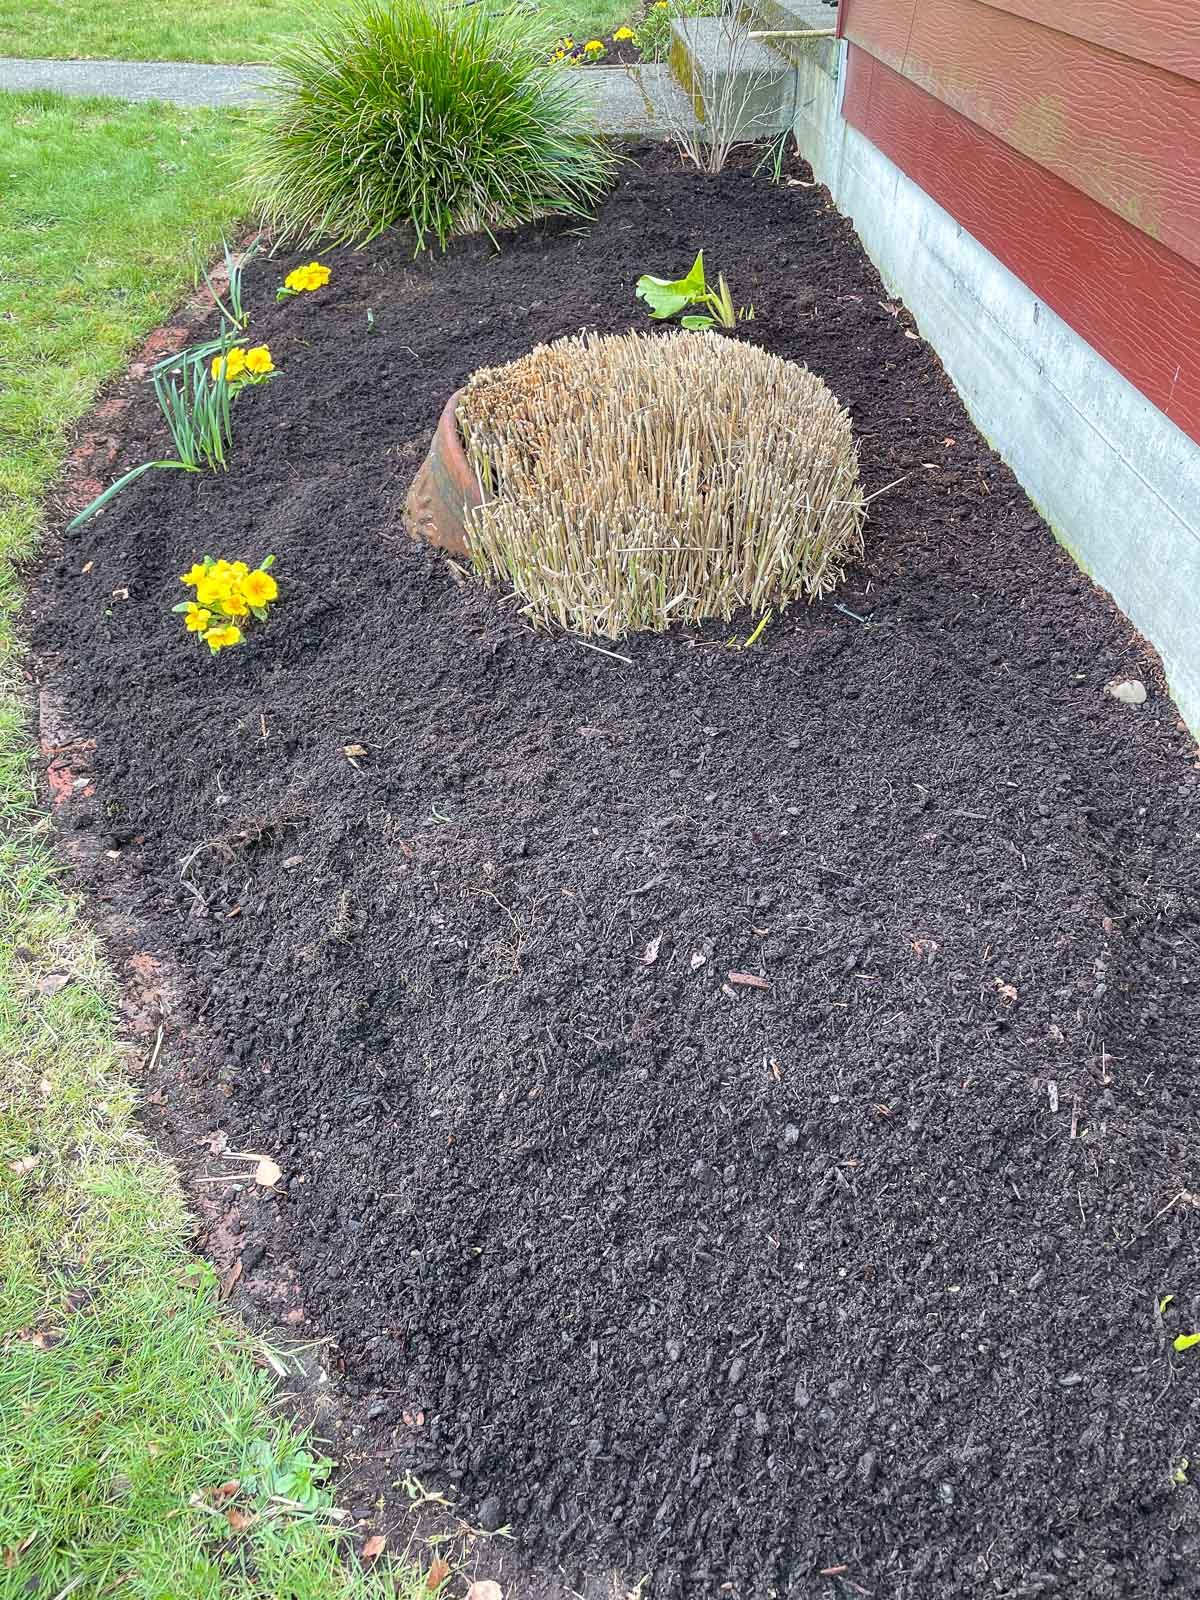 garden bed with cut back ornamental grass where lily of the valley will soon sprout